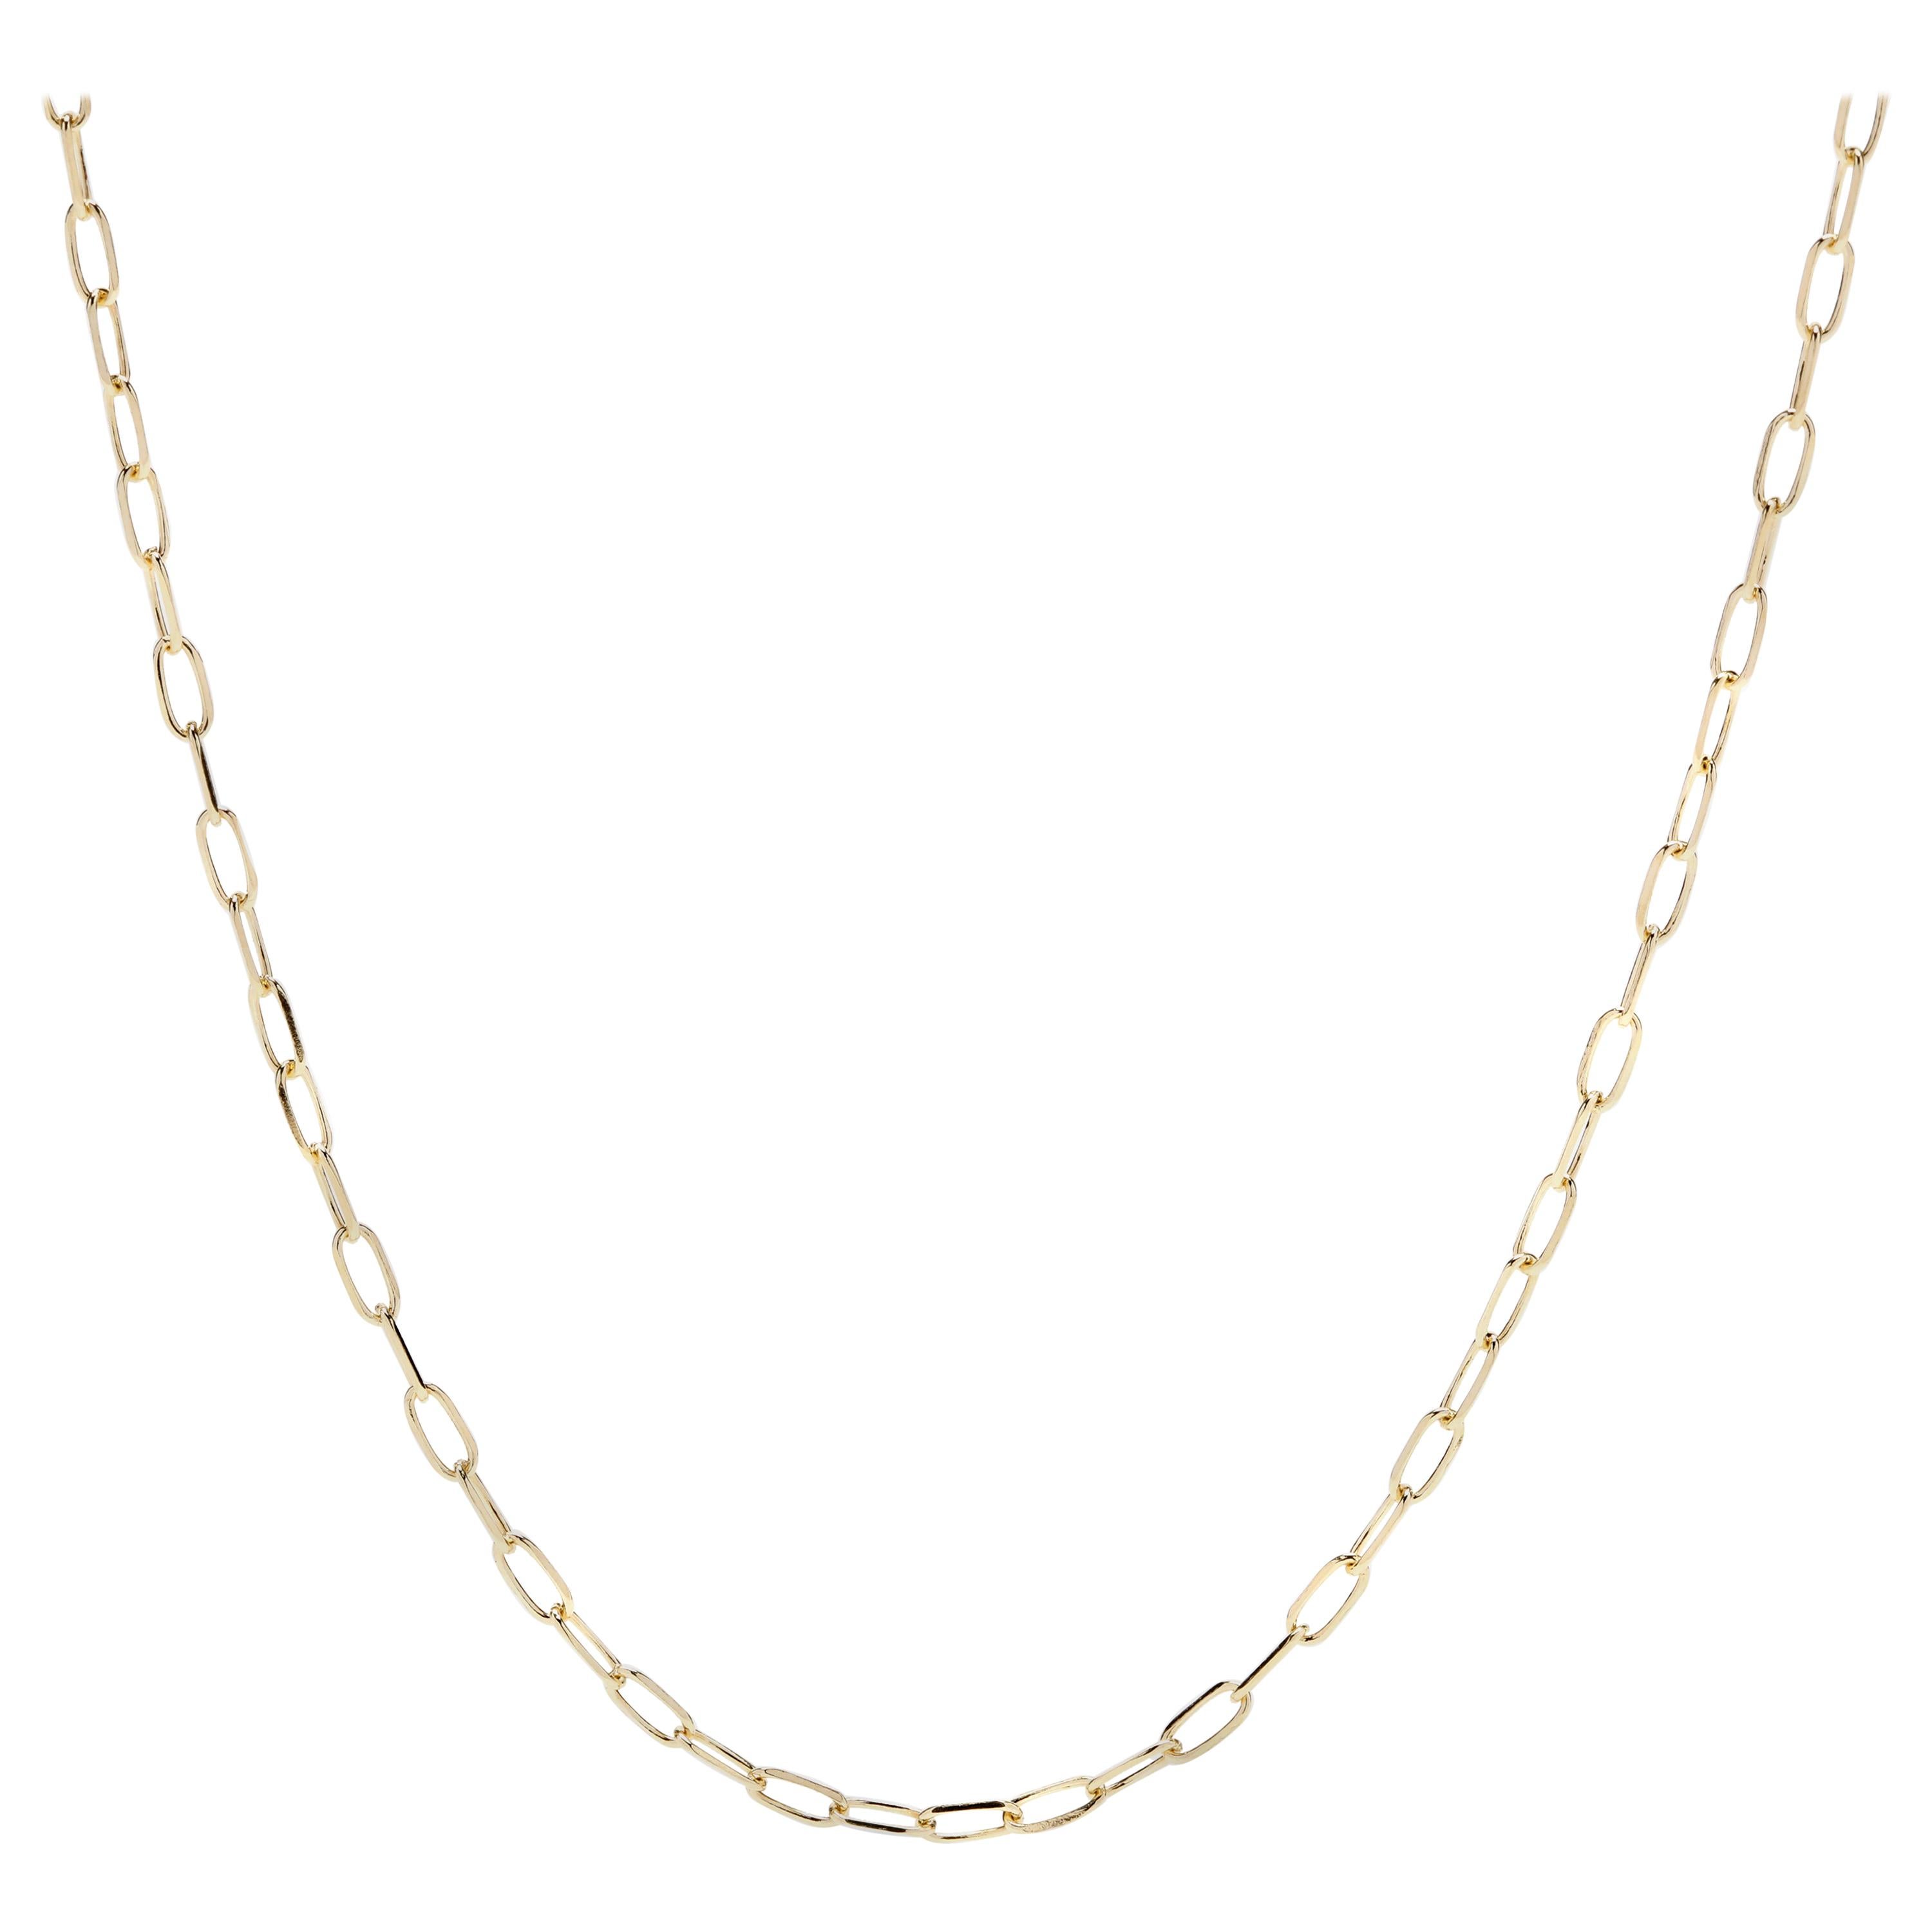 24 inch - Italian 14 Karat Yellow Gold Small Paperclip Chain Necklace, Trendy